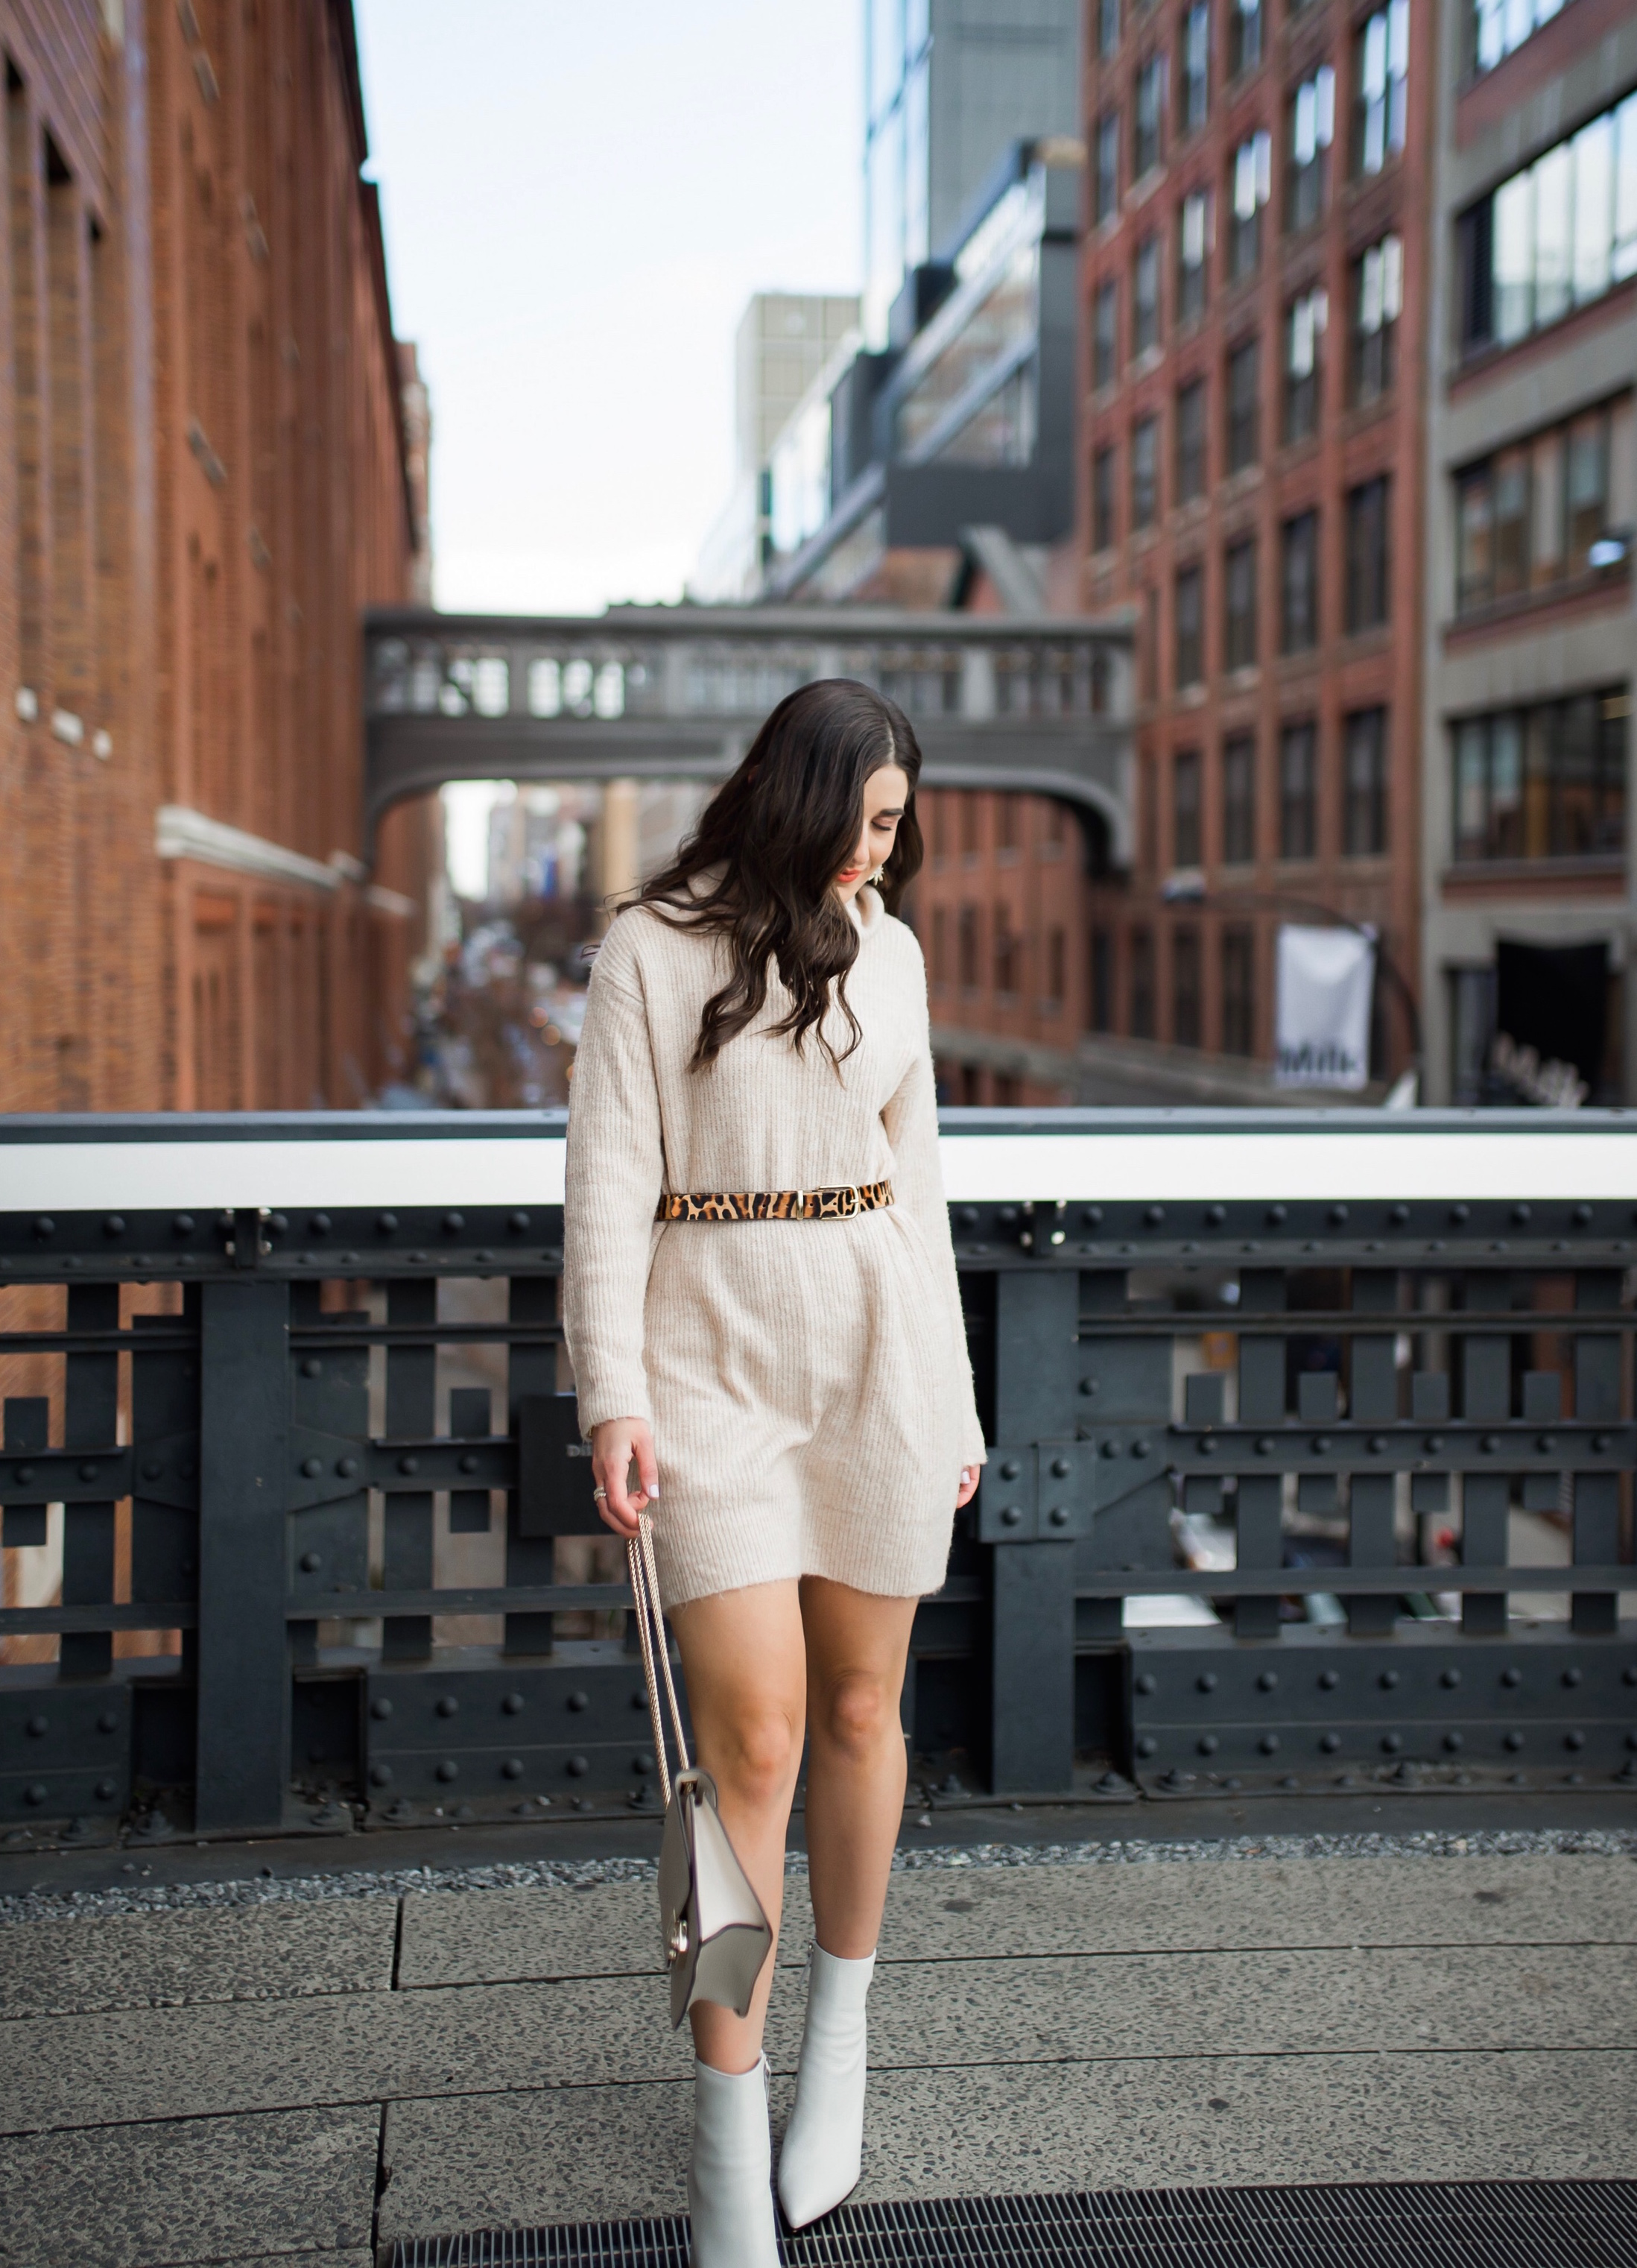 Why Blogging Is Far From Freeloading Beige Sweater Dress White Booties Esther Santer Fashion Blog NYC Street Style Blogger Outfit OOTD Trendy Shopping Leopard Belt Neutral Winter How To Wear Shop  Sale Mango Jcrew Inspiration The High Line Photoshoot.jpg